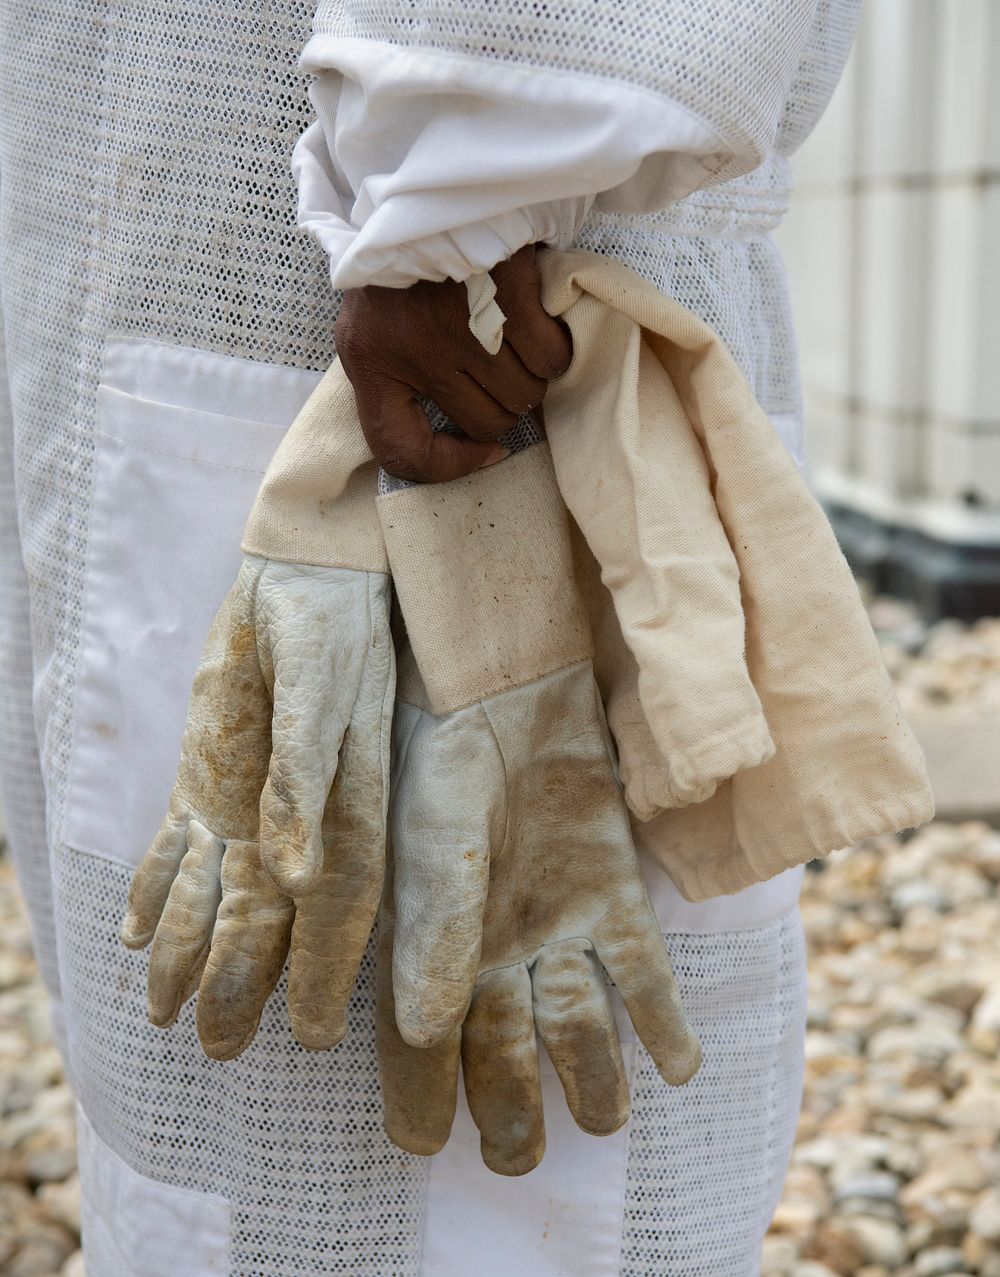 Leslie Burk a retired USDA engineer and project manager for the people’s garden holds on to her protective gloves after…